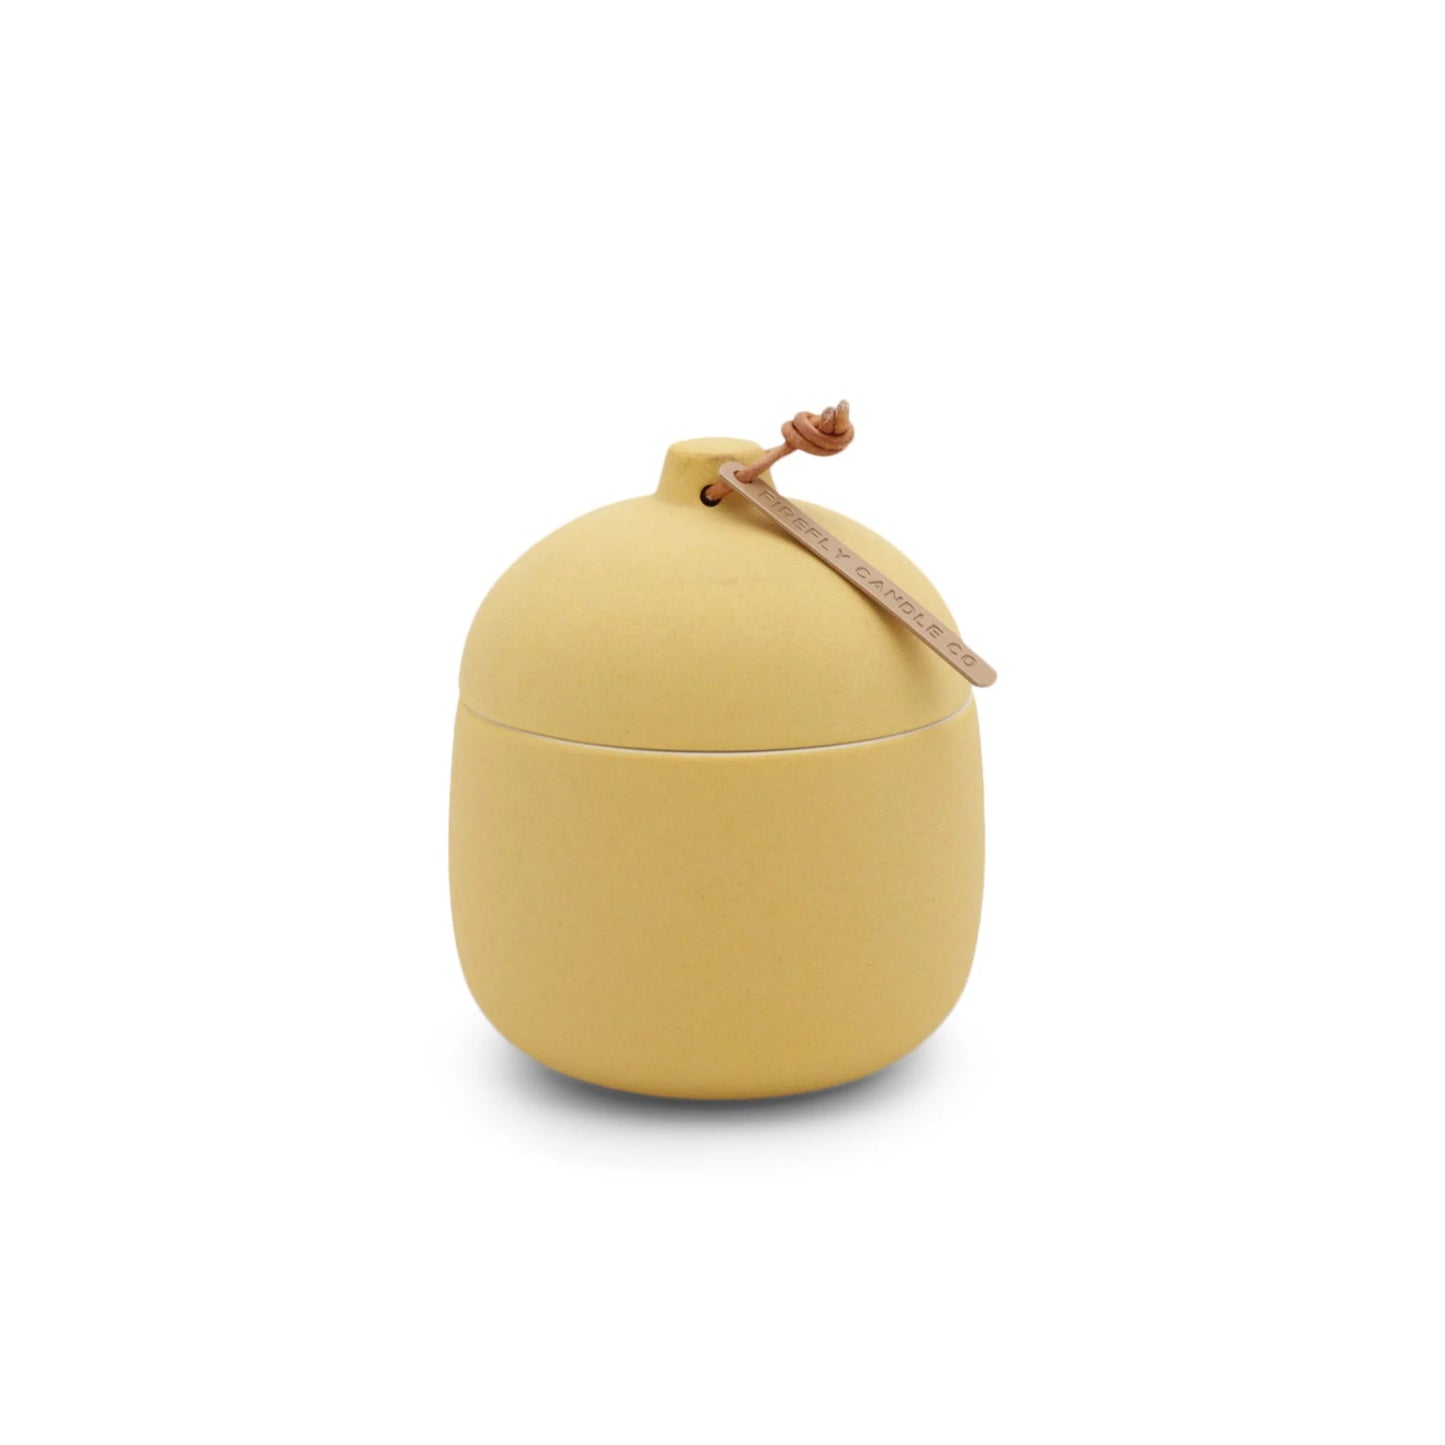 Keepsake 4 oz Candle - Lemon Hibiscus - yellow colored clay vessels